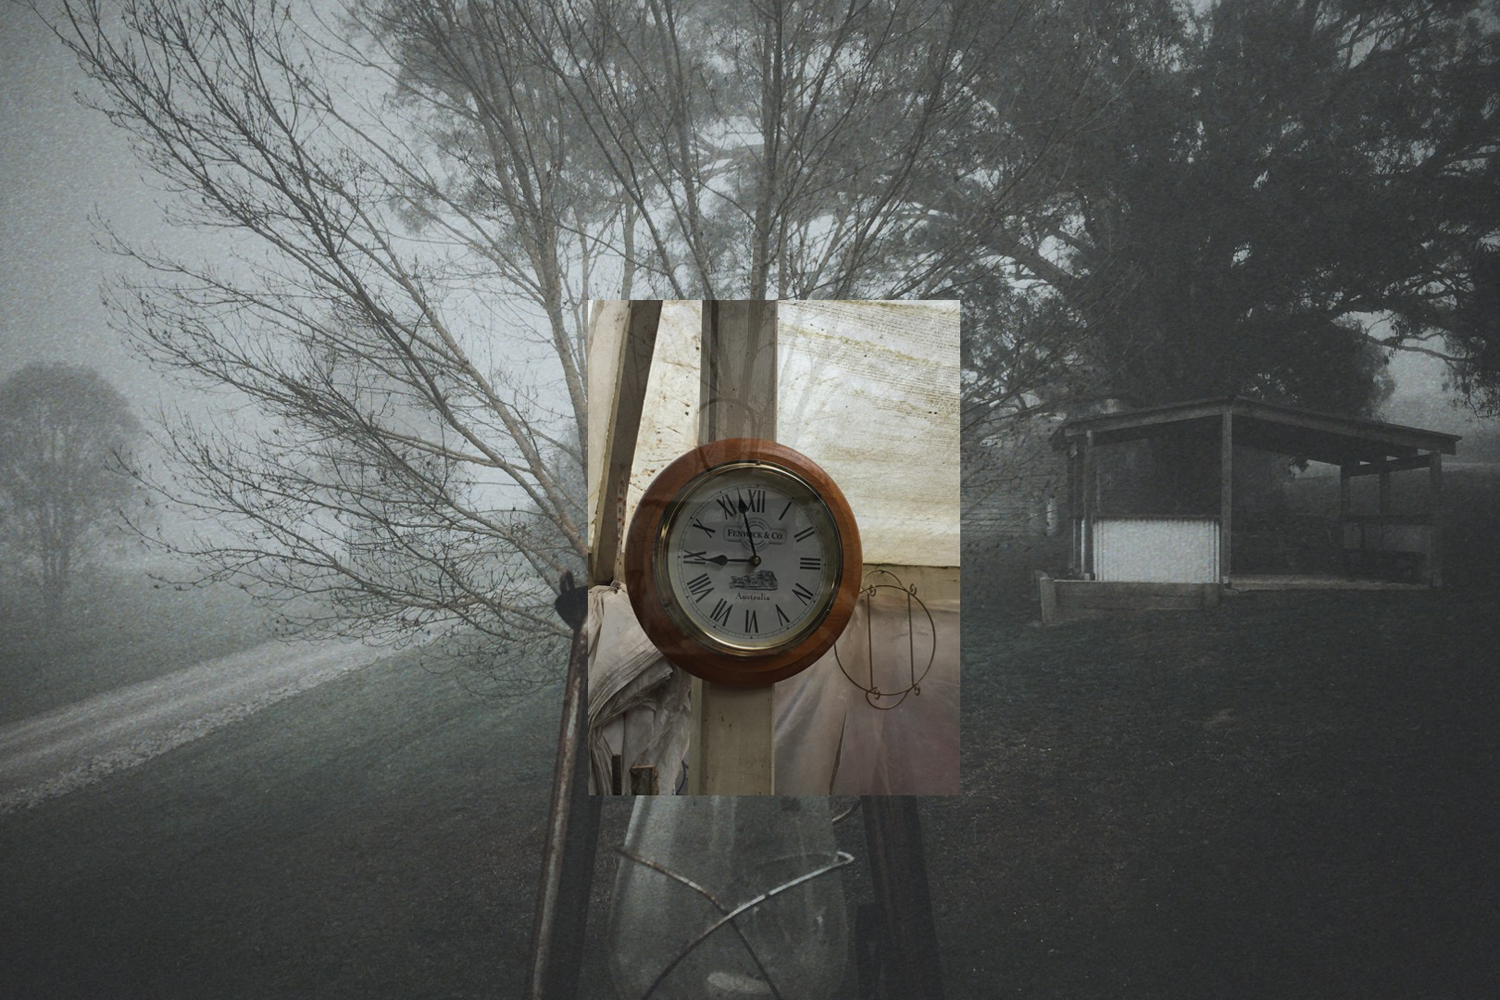 A digital collage of a foggy landscape and an old clock